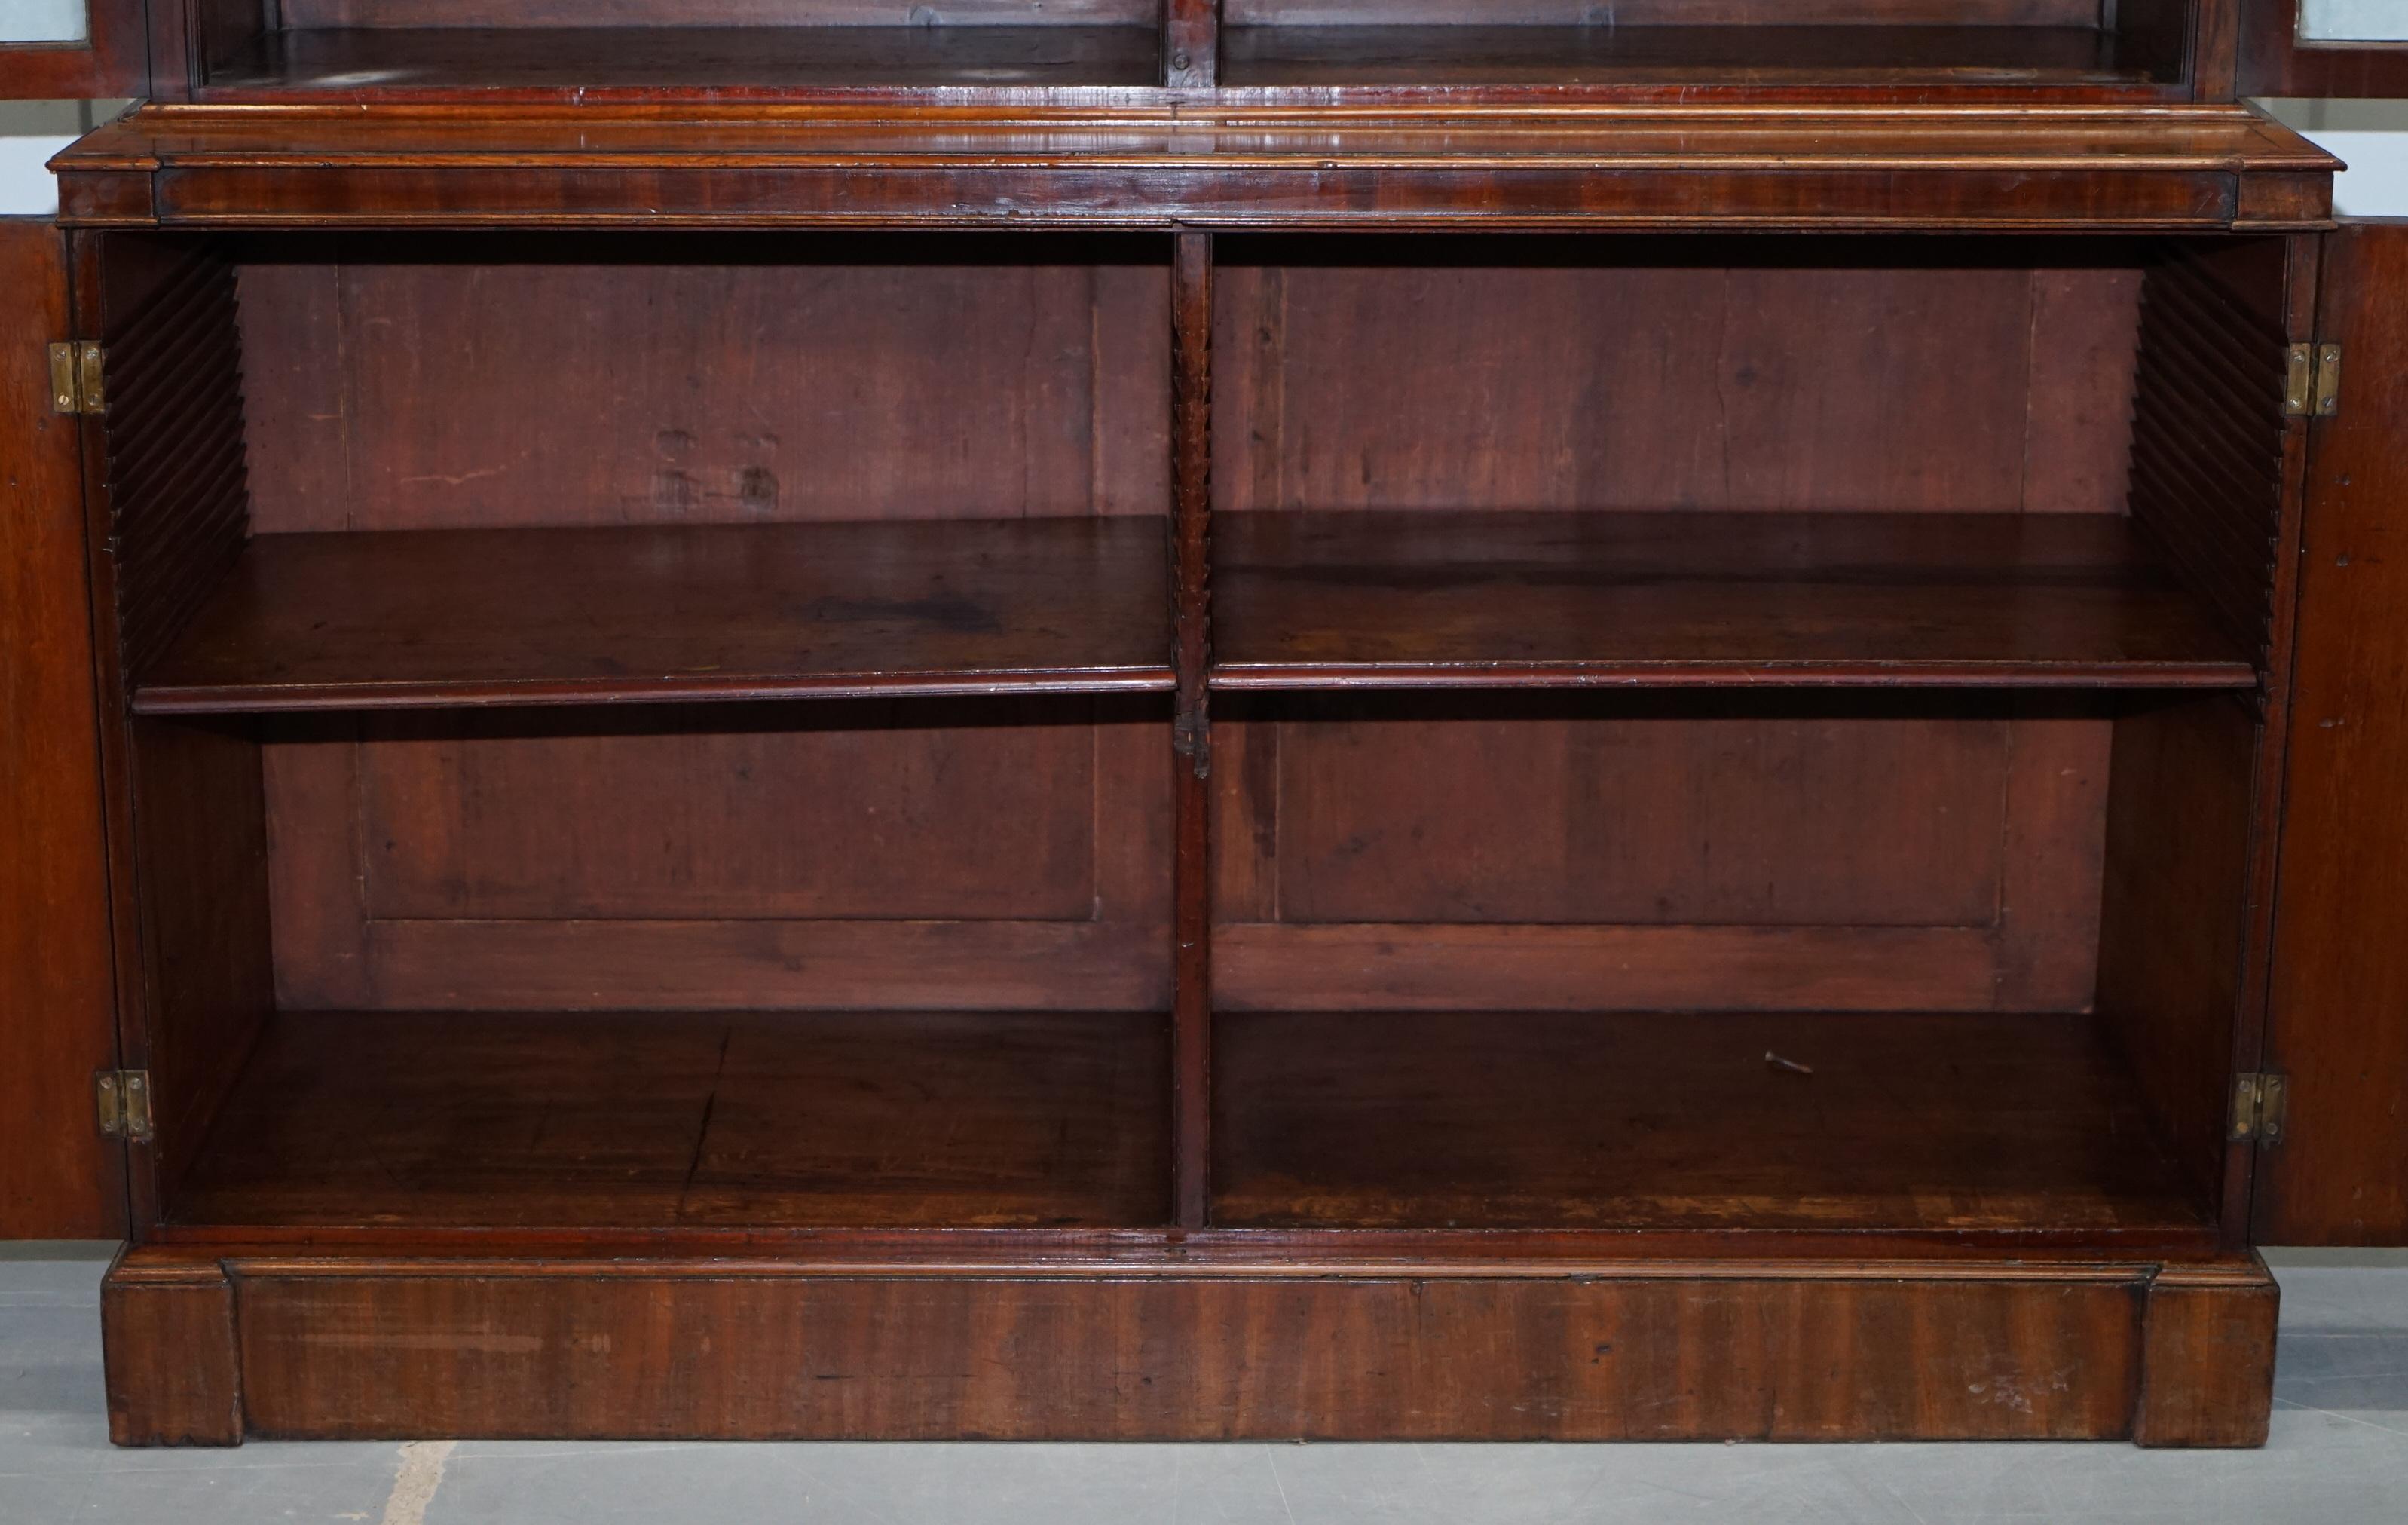 Very Rare Gillows Astral Glazed Mahogany Bookcase Cabinet Original Paper Labels 10